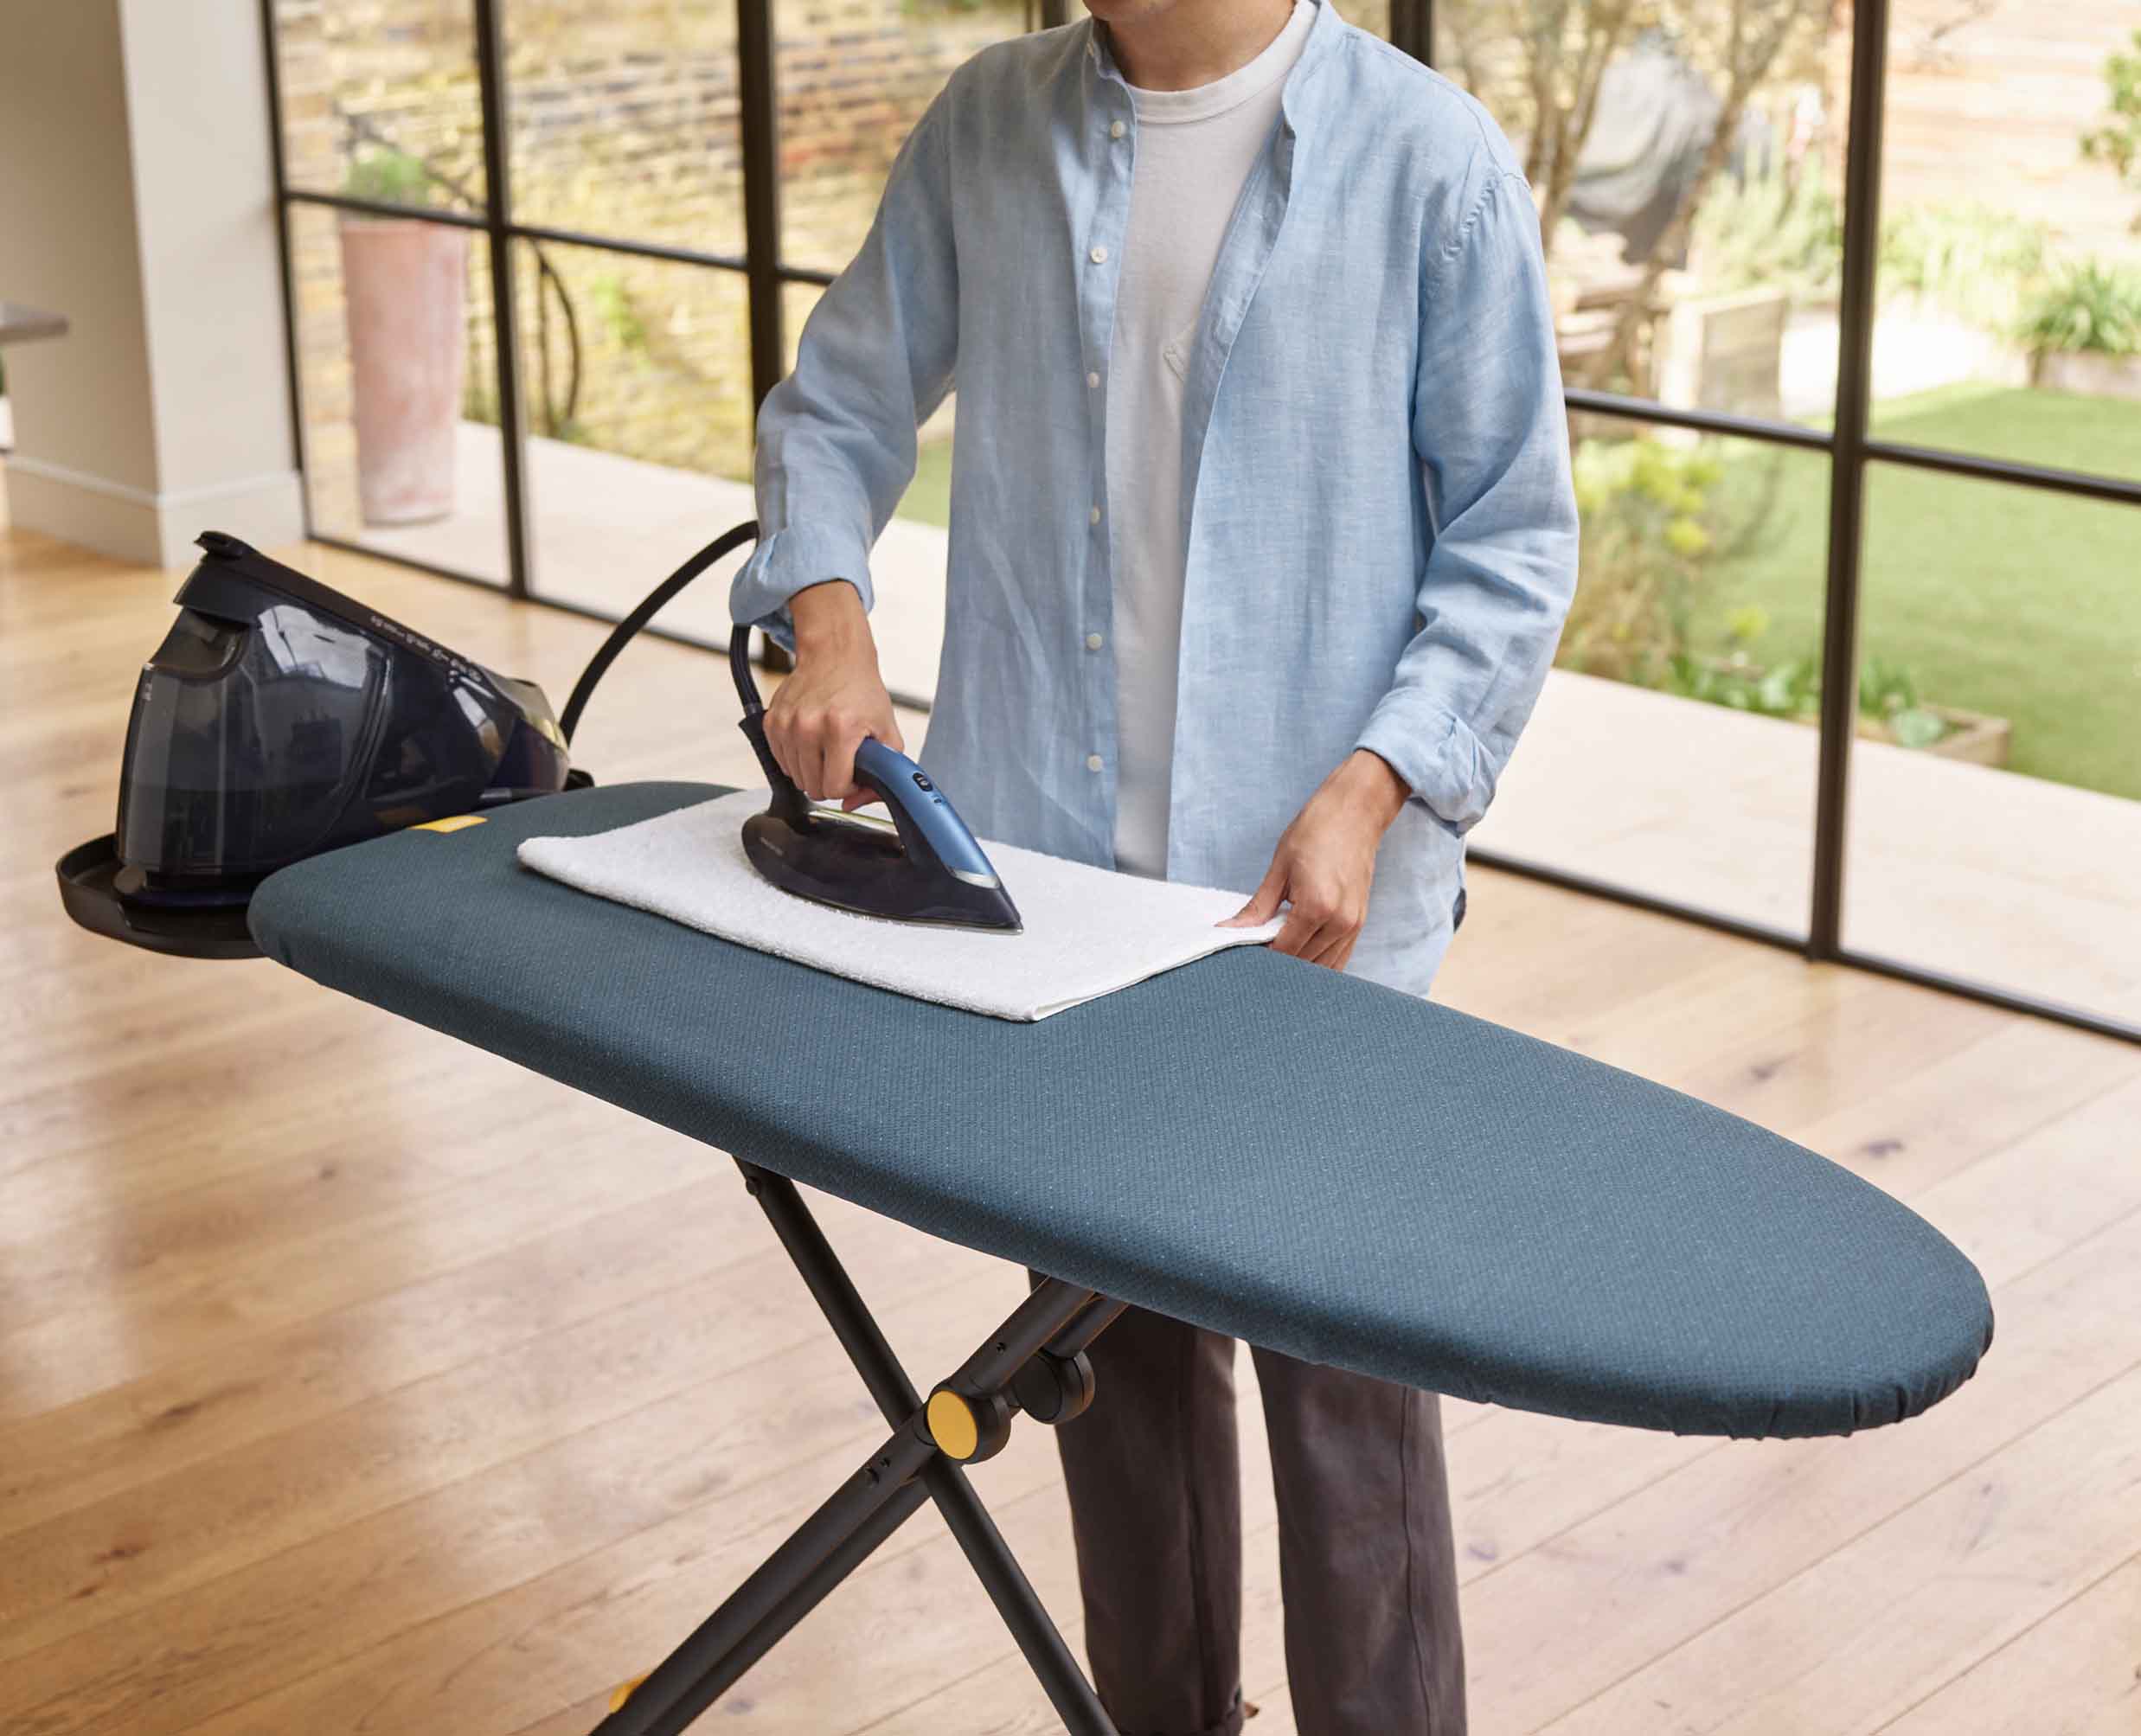 Glide Max Plus Easy-store Ironing Board - 50030 - Image 3